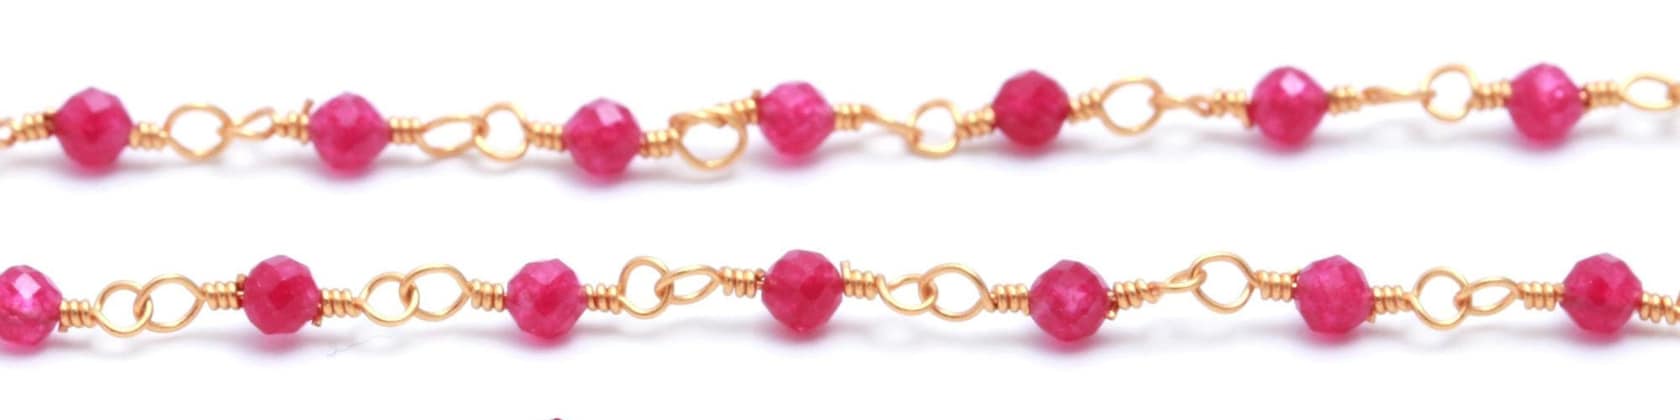 Natural pink Chalcedony 17 to 20mm Free Shape Nugget Tumbled Briolette  Faceted Bezel Connector Chain